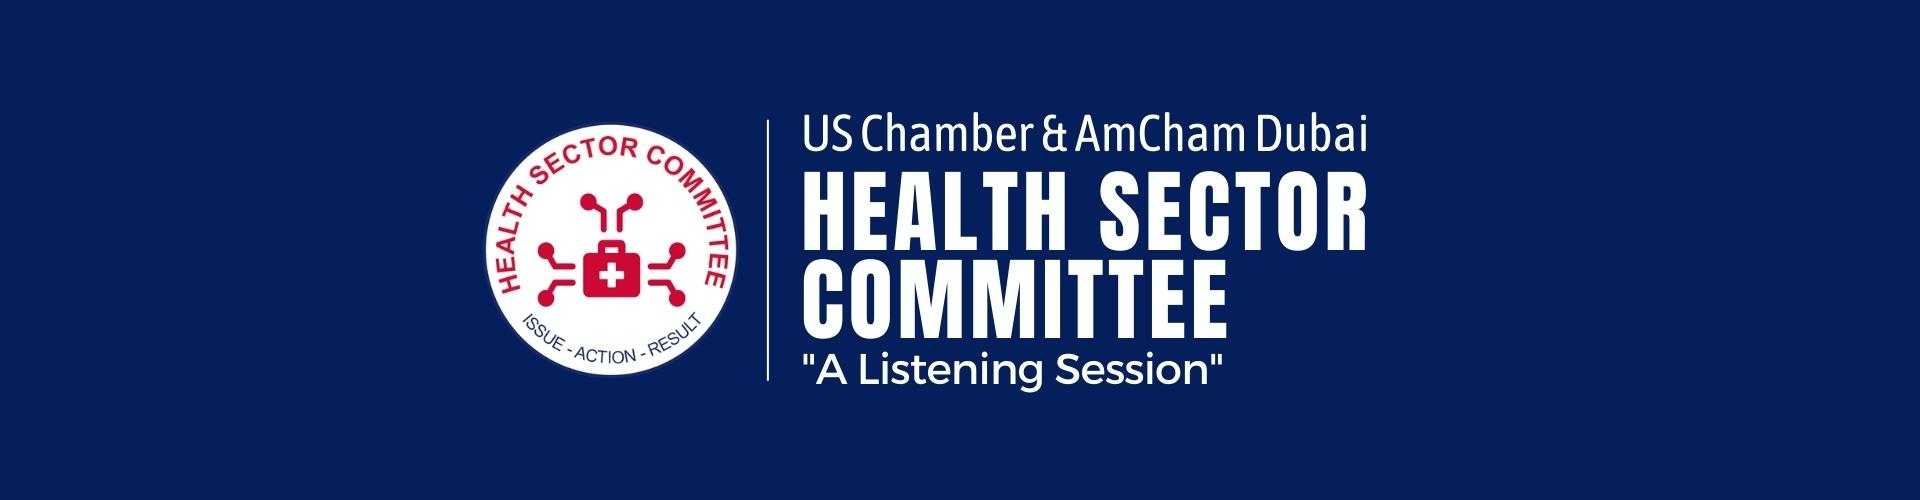 thumbnails " Listening Sesson"- UAE Healthcare Data Law- AmCham Dubai's Health Sector Committee in Collaboration with the US Chamber